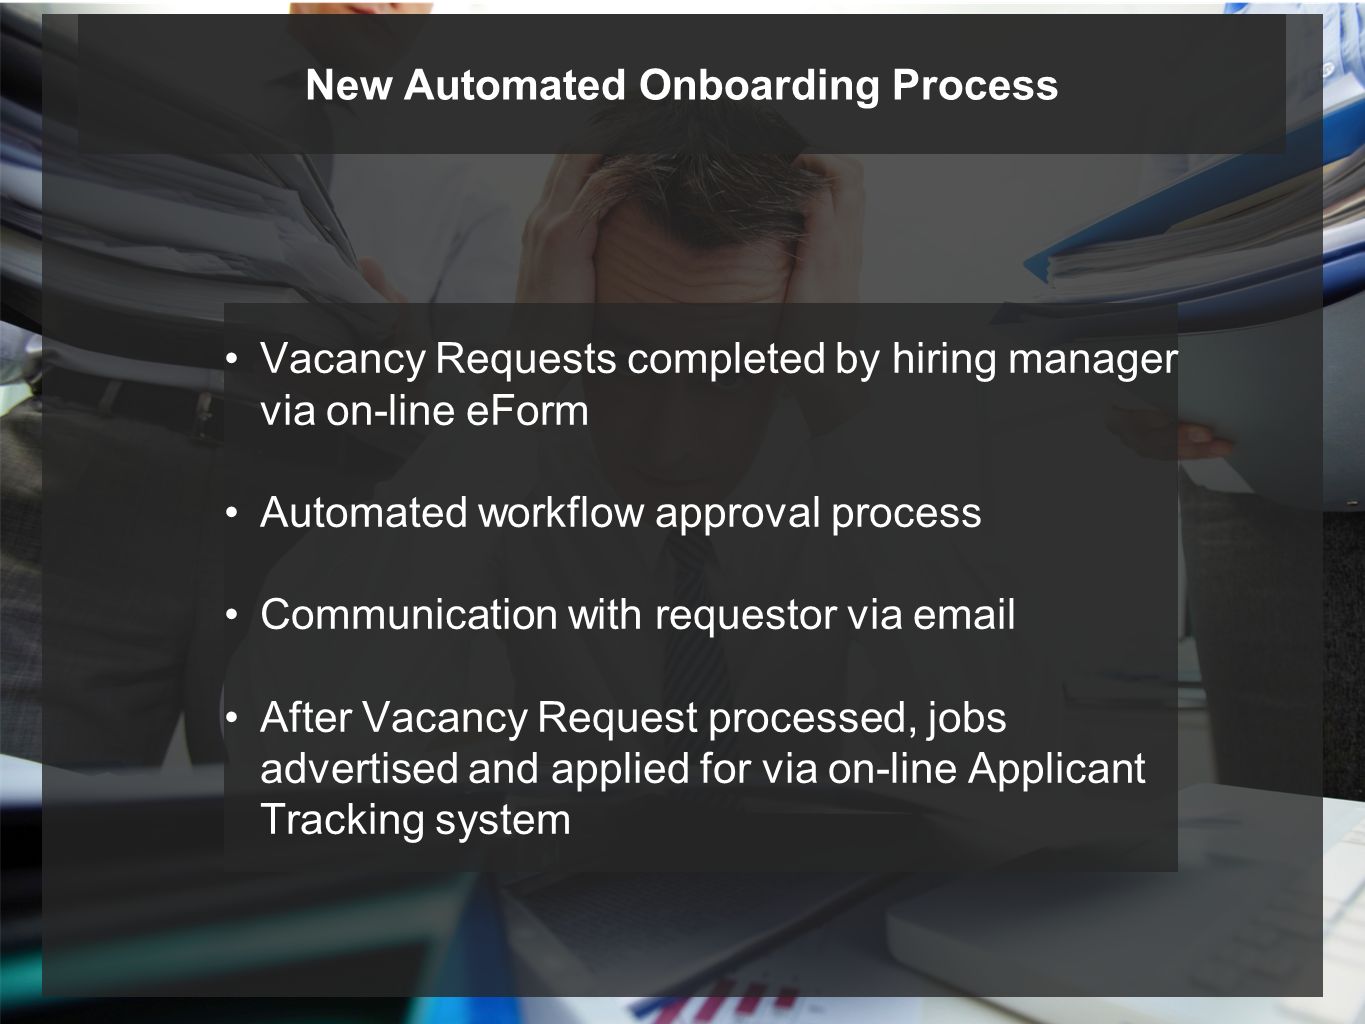 Vacancy Requests completed by hiring manager via on-line eForm Automated workflow approval process Communication with requestor via  After Vacancy Request processed, jobs advertised and applied for via on-line Applicant Tracking system New Automated Onboarding Process